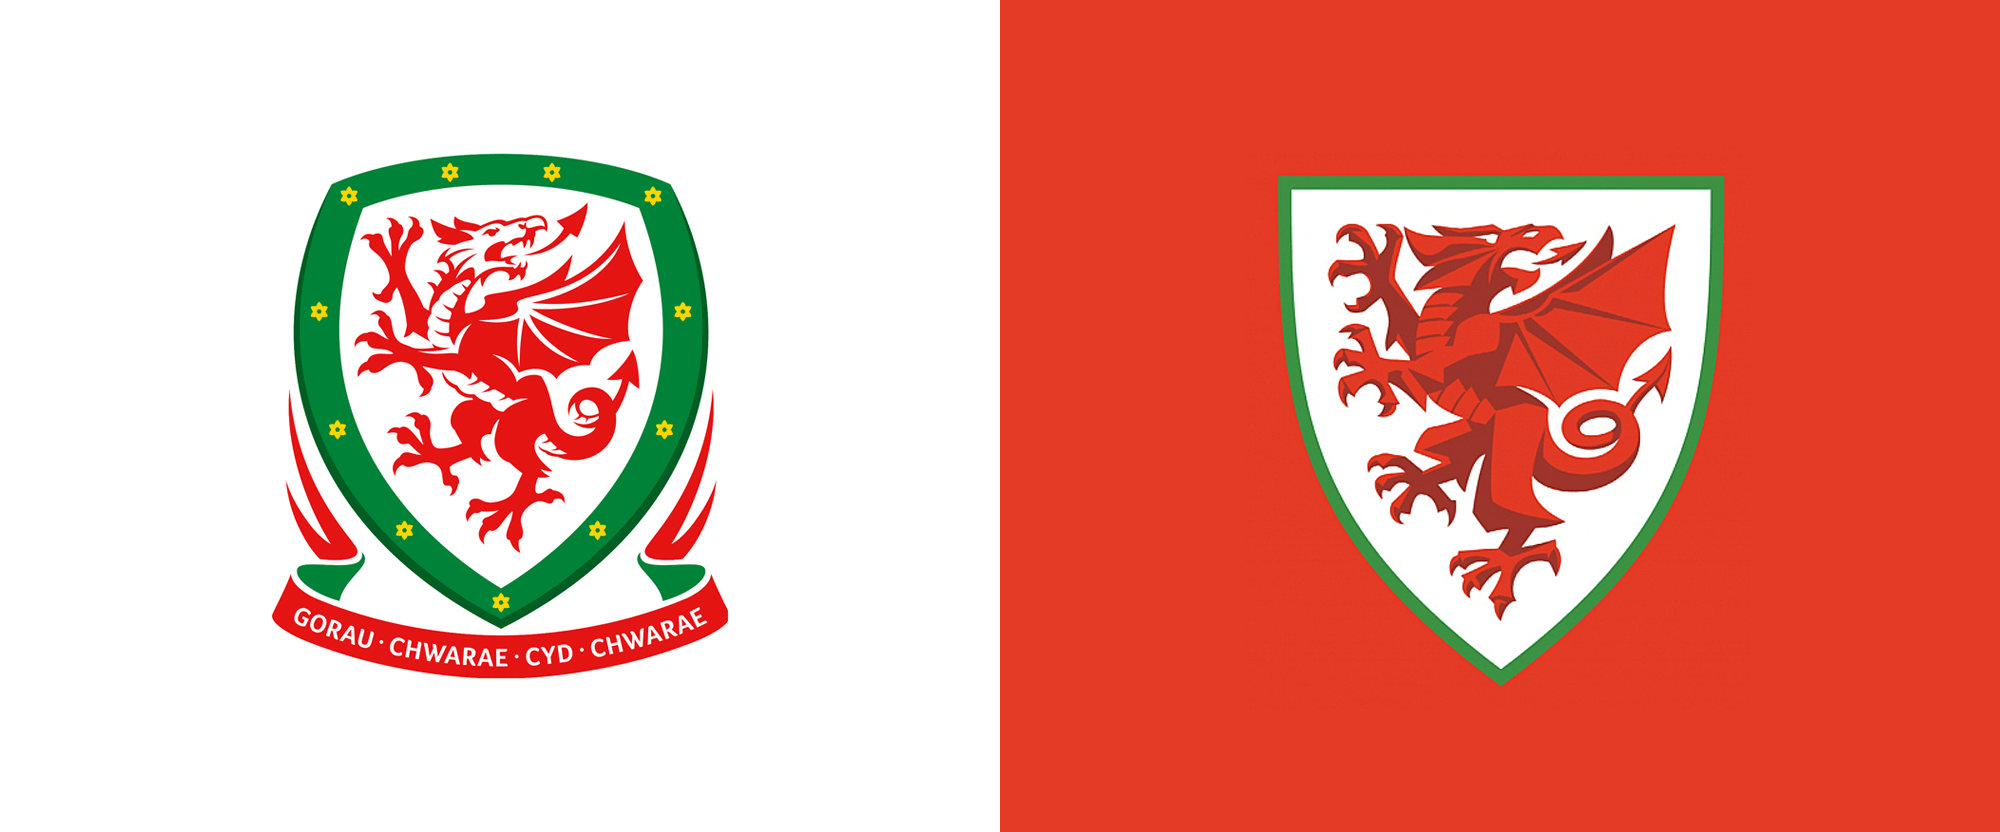 Wales Logo - Brand New: New Logo and Identity for Football in Wales